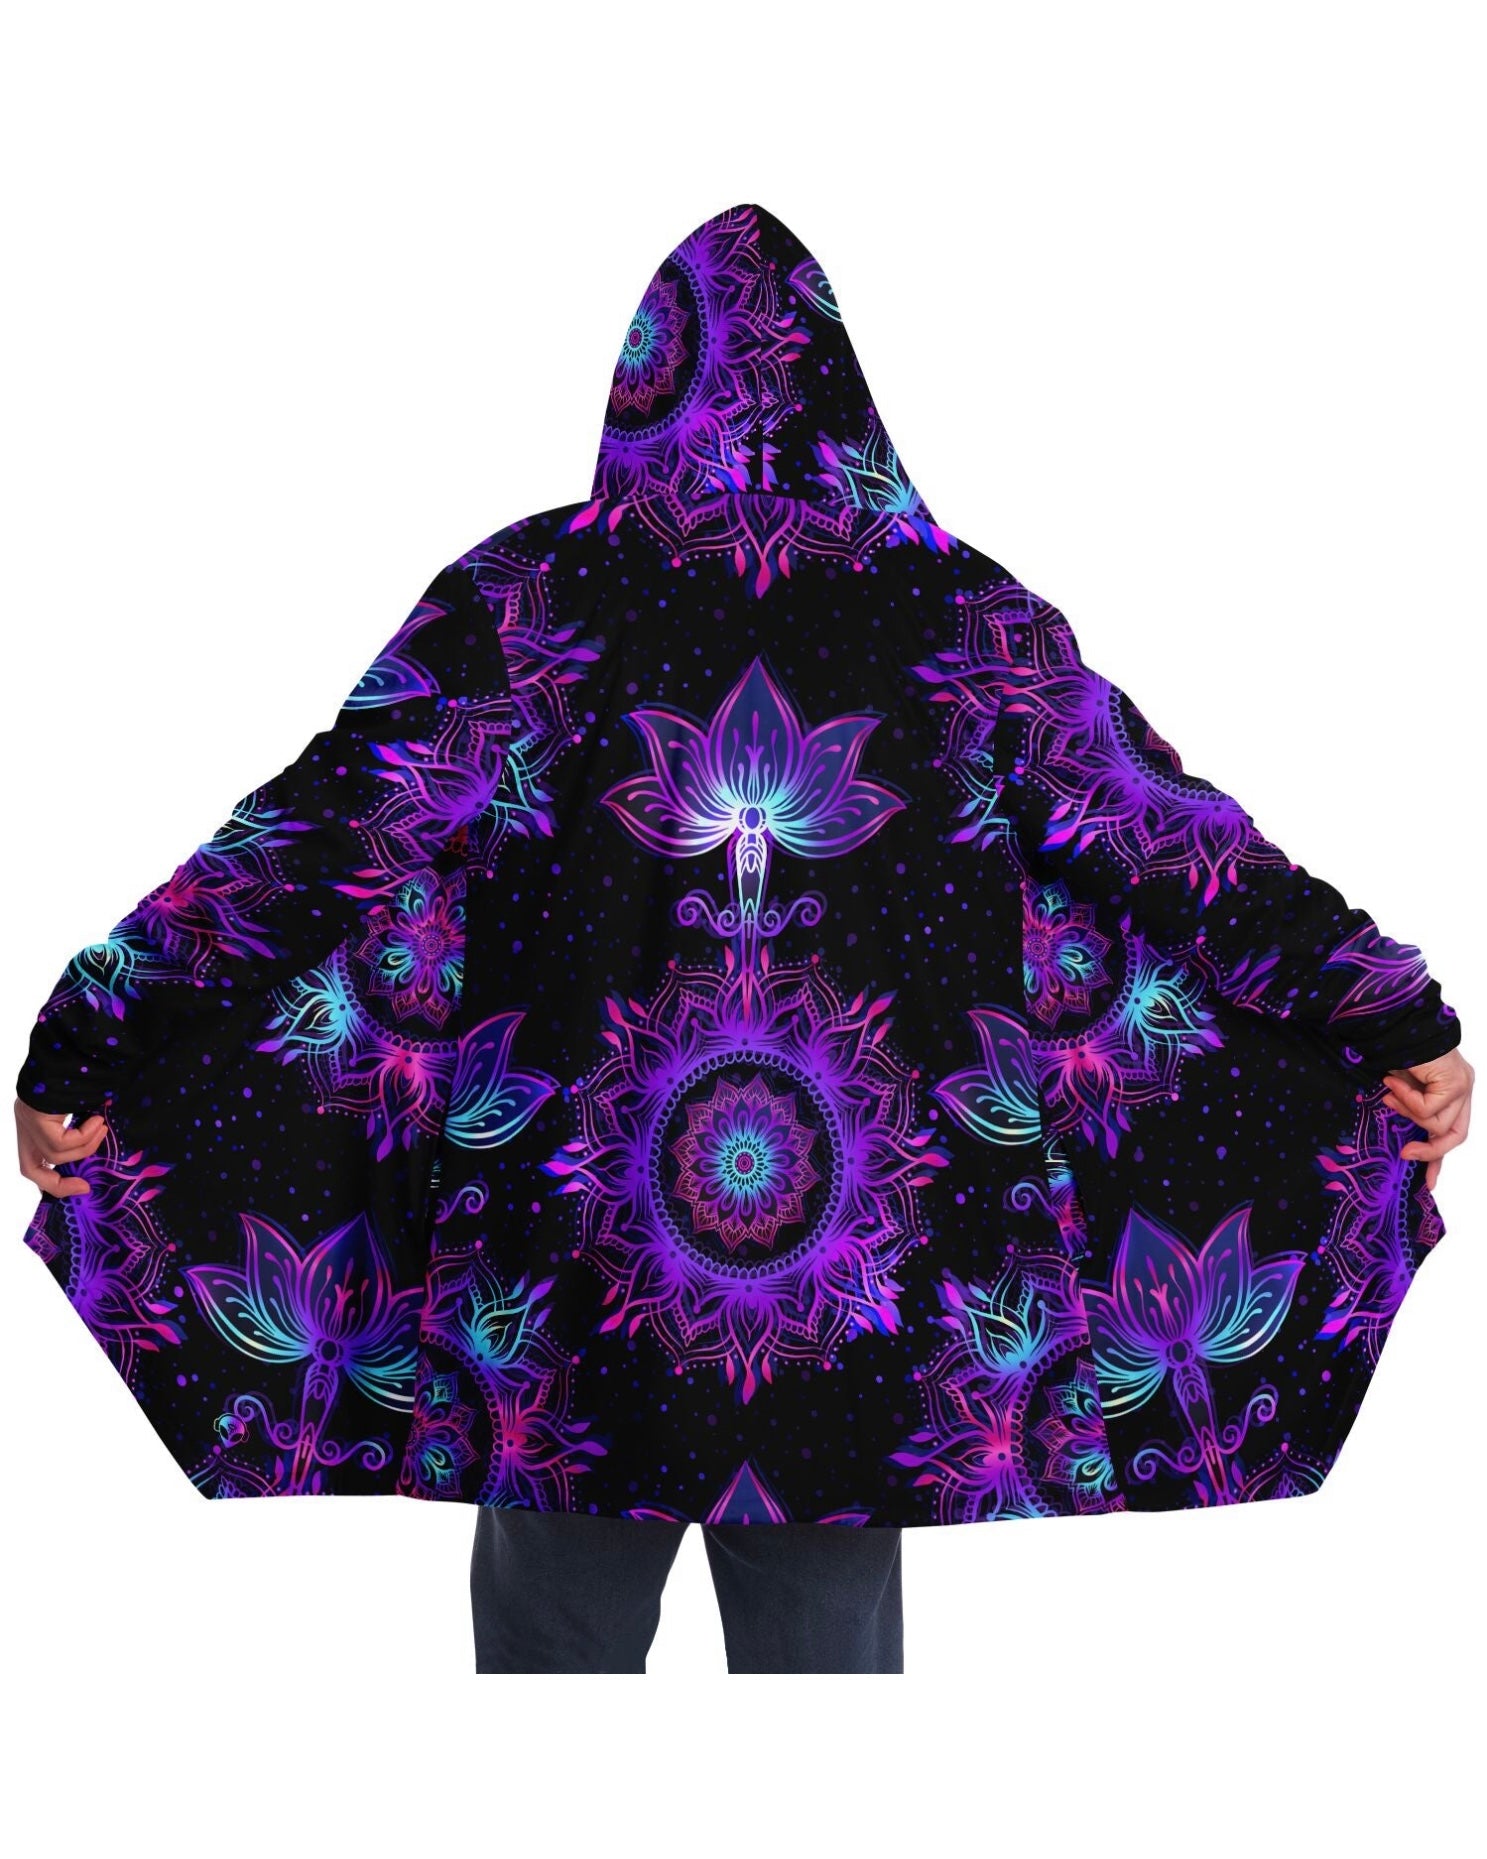 Model showcasing the full design of the Starlight Mandala Cloak from the back with the cloak spread open.